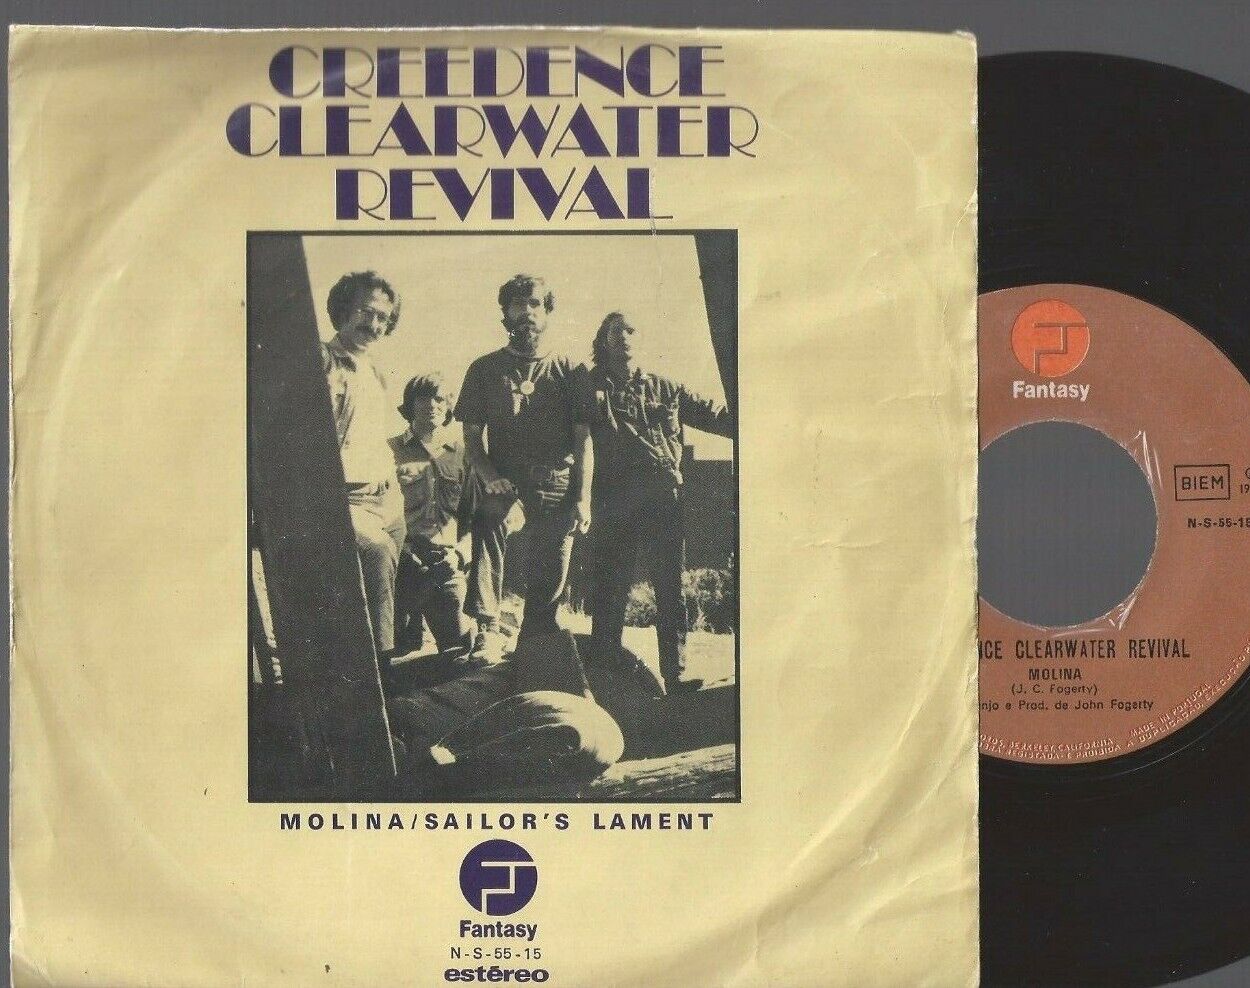 CCR Creedence Clearwater Revival Molina / Sailor's Lament 45 RECORD + PIC SLEEVE